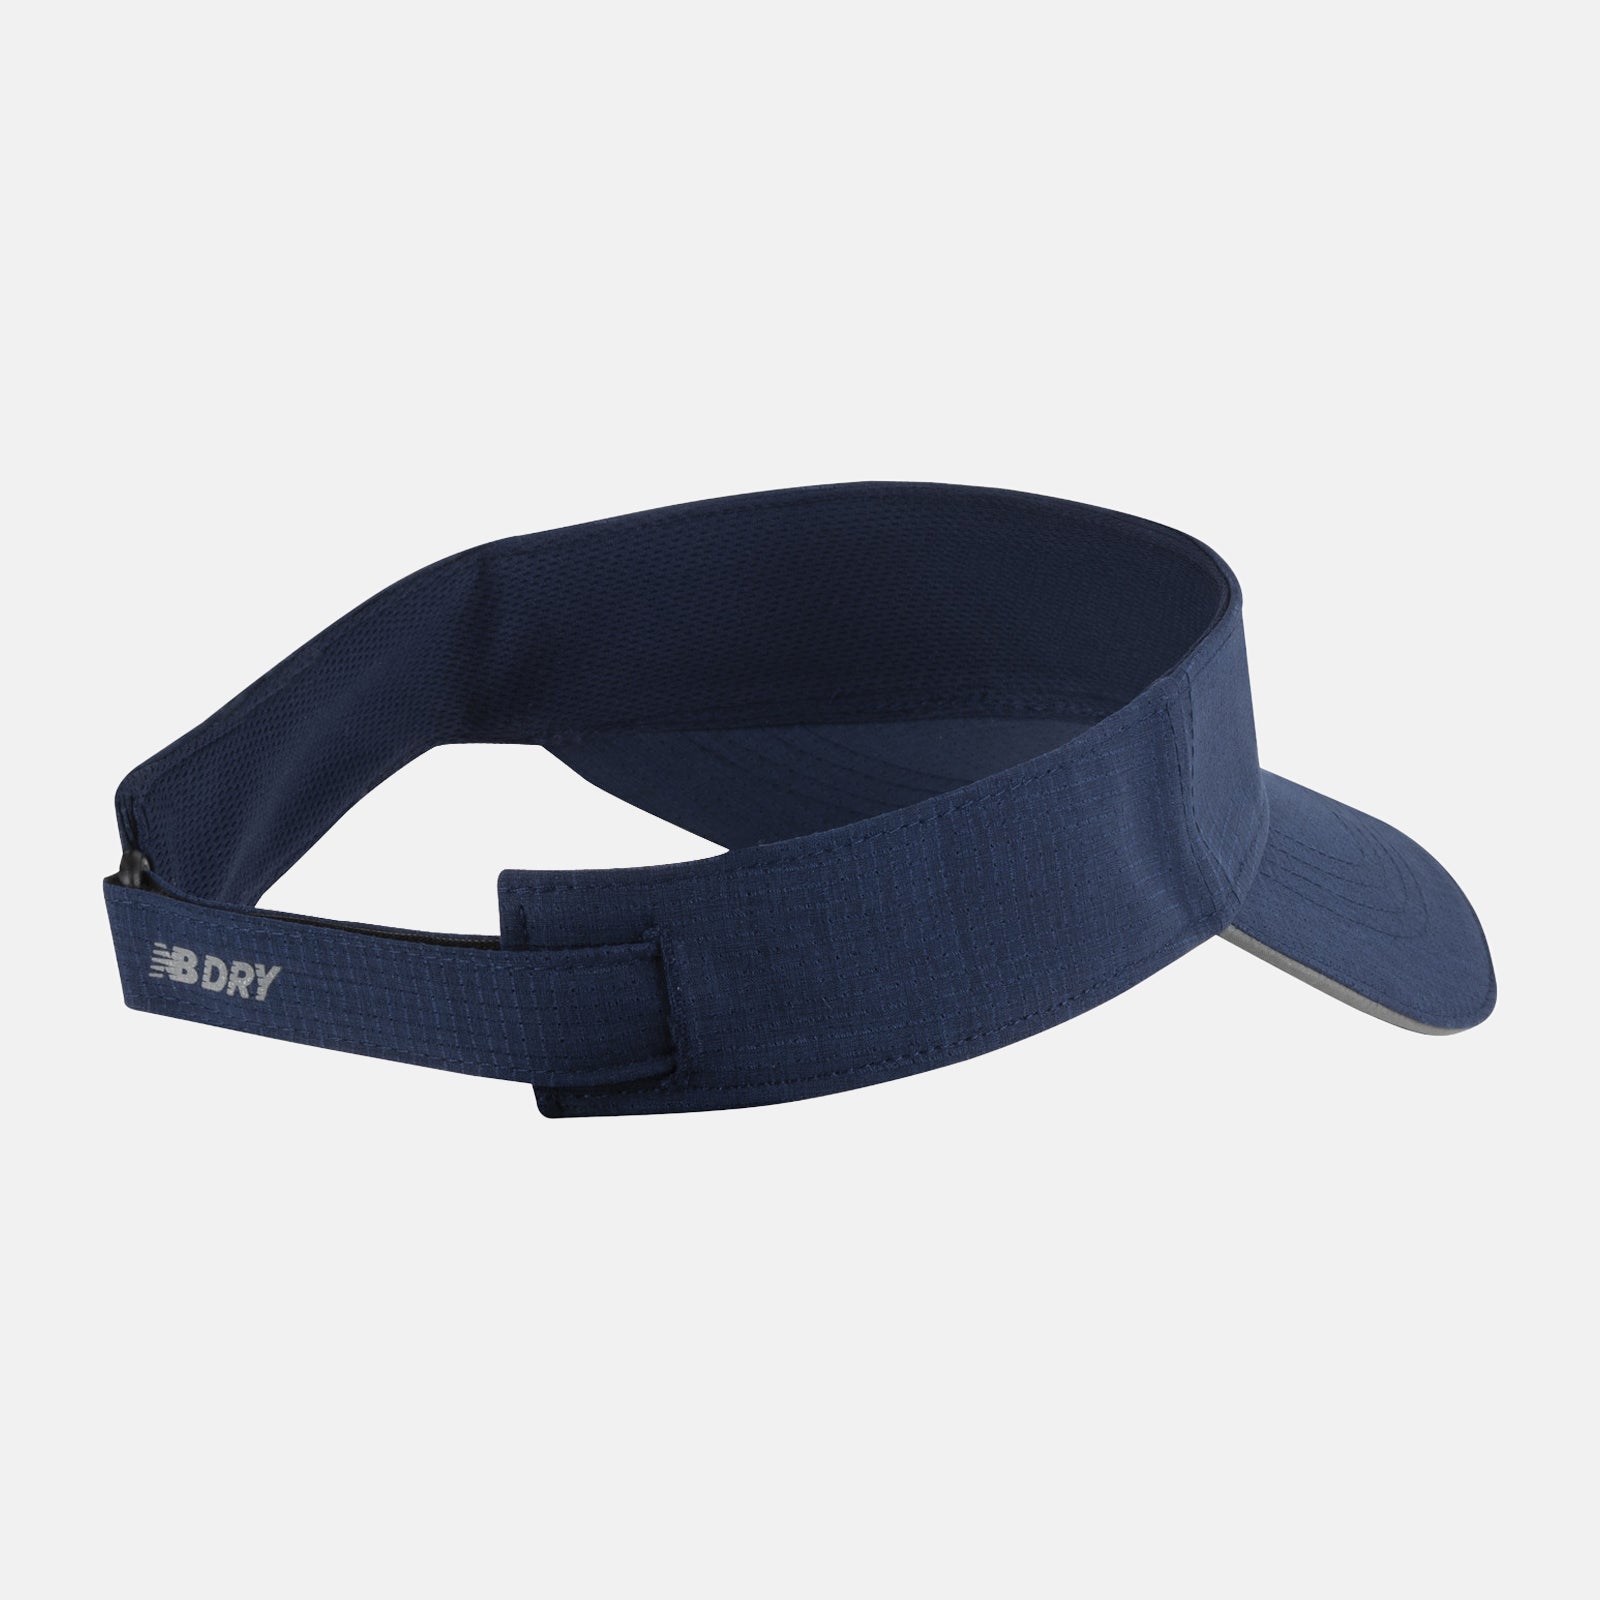 NEW BALANCE Performance Visor in Team Navy LAH21105 O/S TEAM NAVY FROM EIGHTYWINGOLD - OFFICIAL BRAND PARTNER